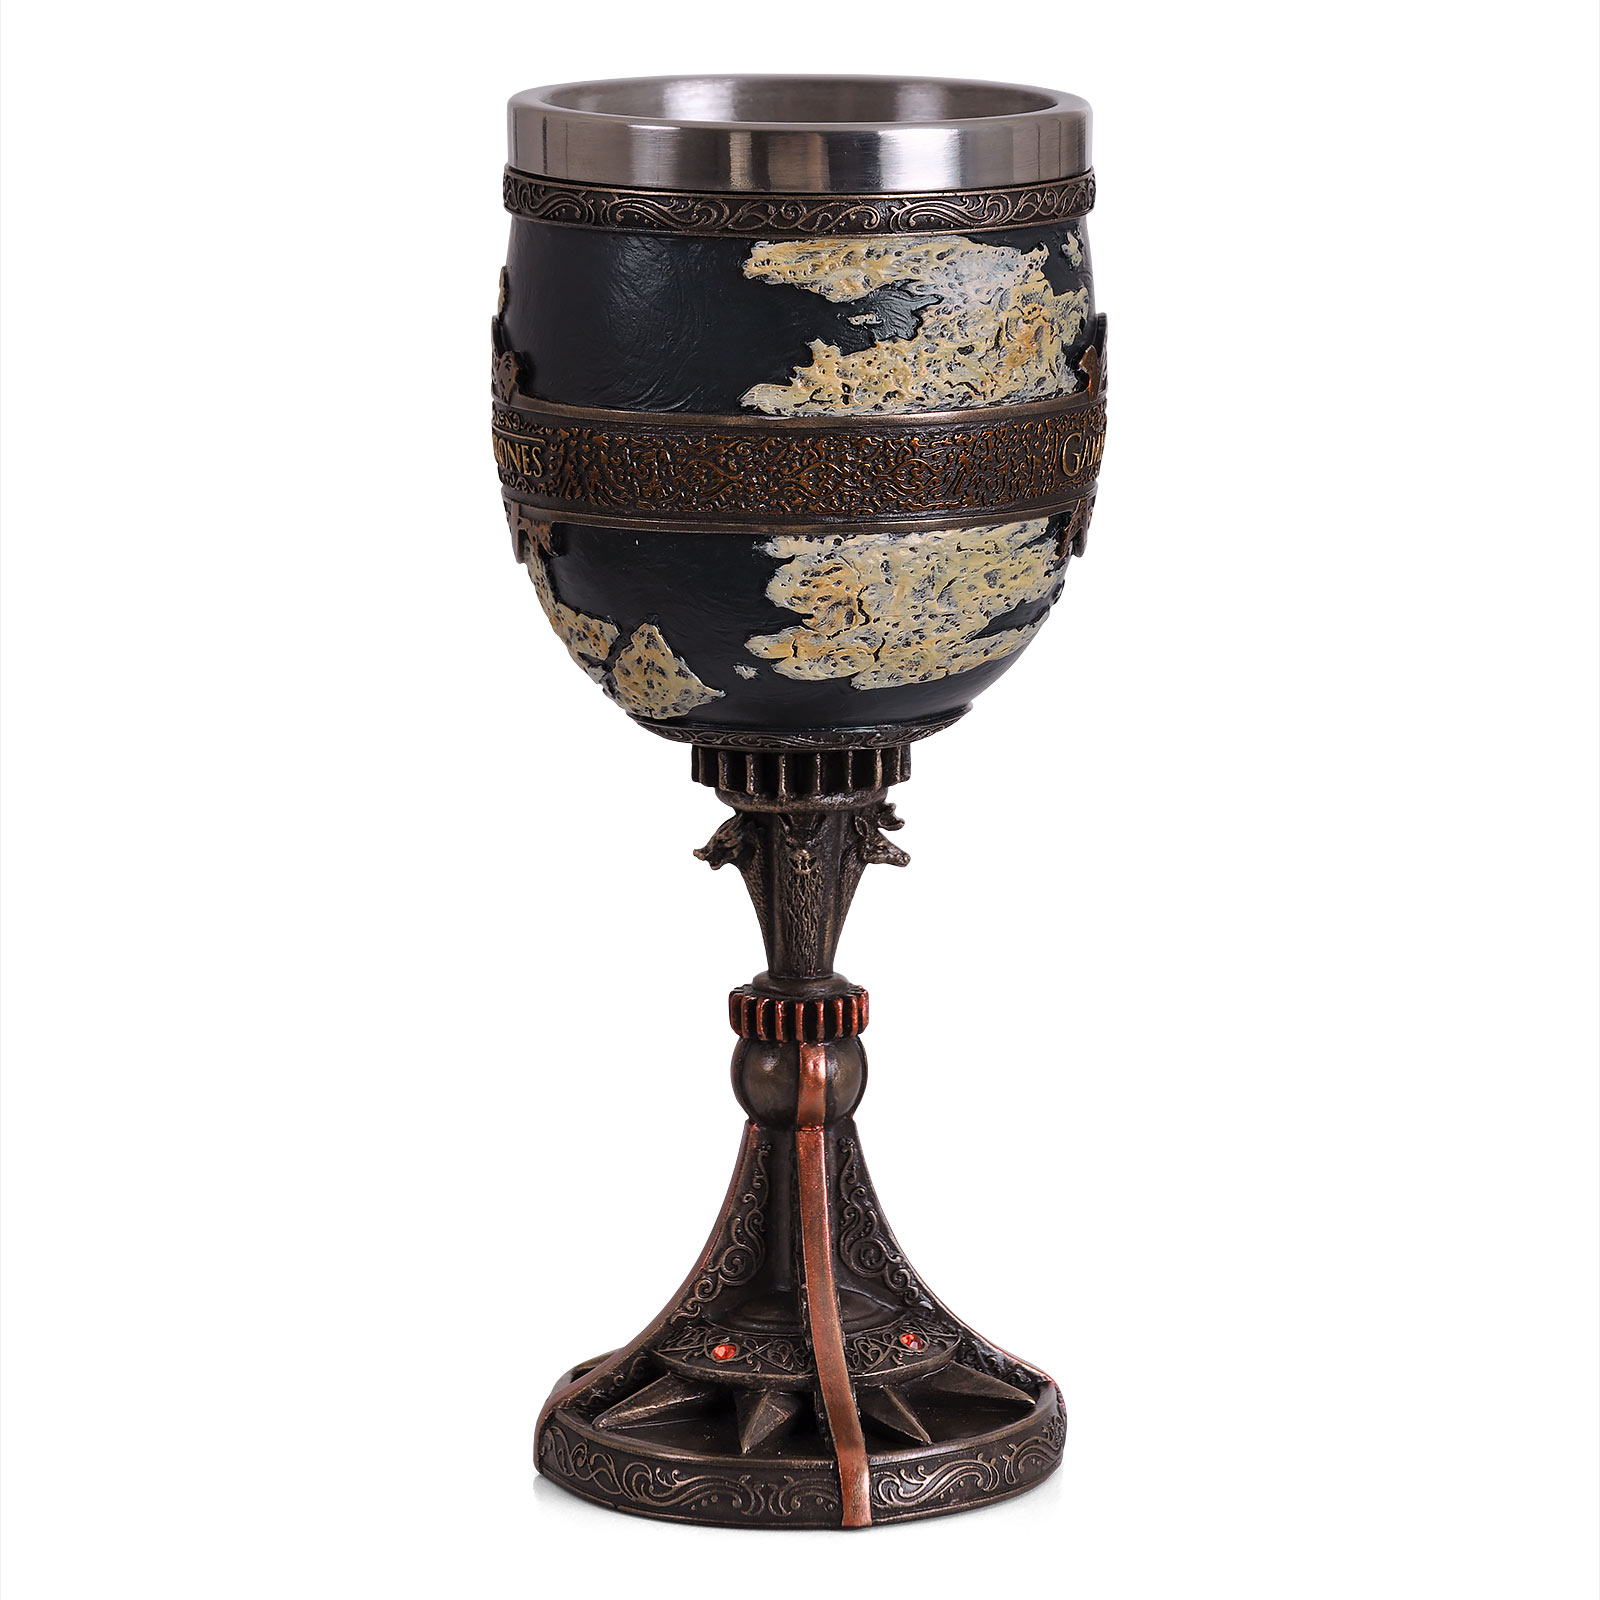 Game of Thrones - Westeros and Essos Chalice deluxe